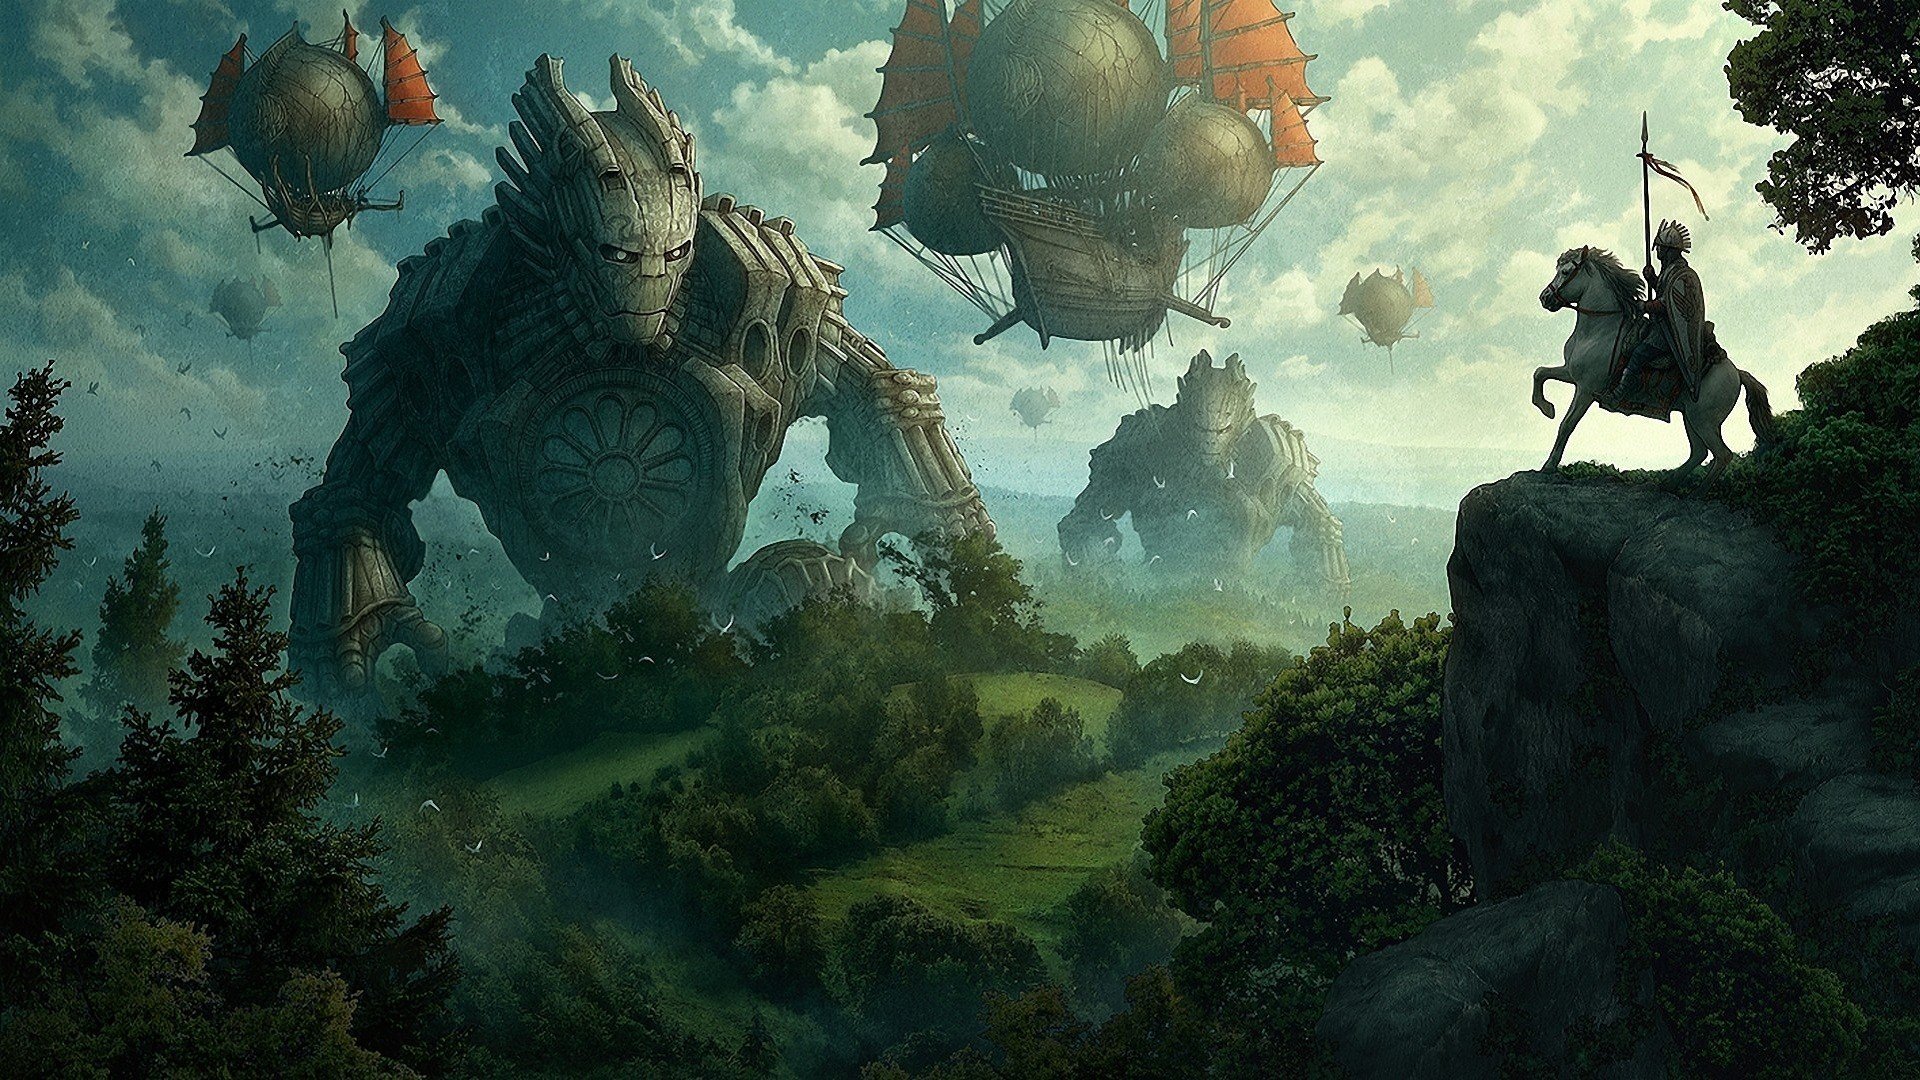 green, Forests, Knights, Grass, Fantasy, Art, Collosus, Artwork, Medieval, Zeppelin, Air, Balloons, Skyscapes Wallpaper